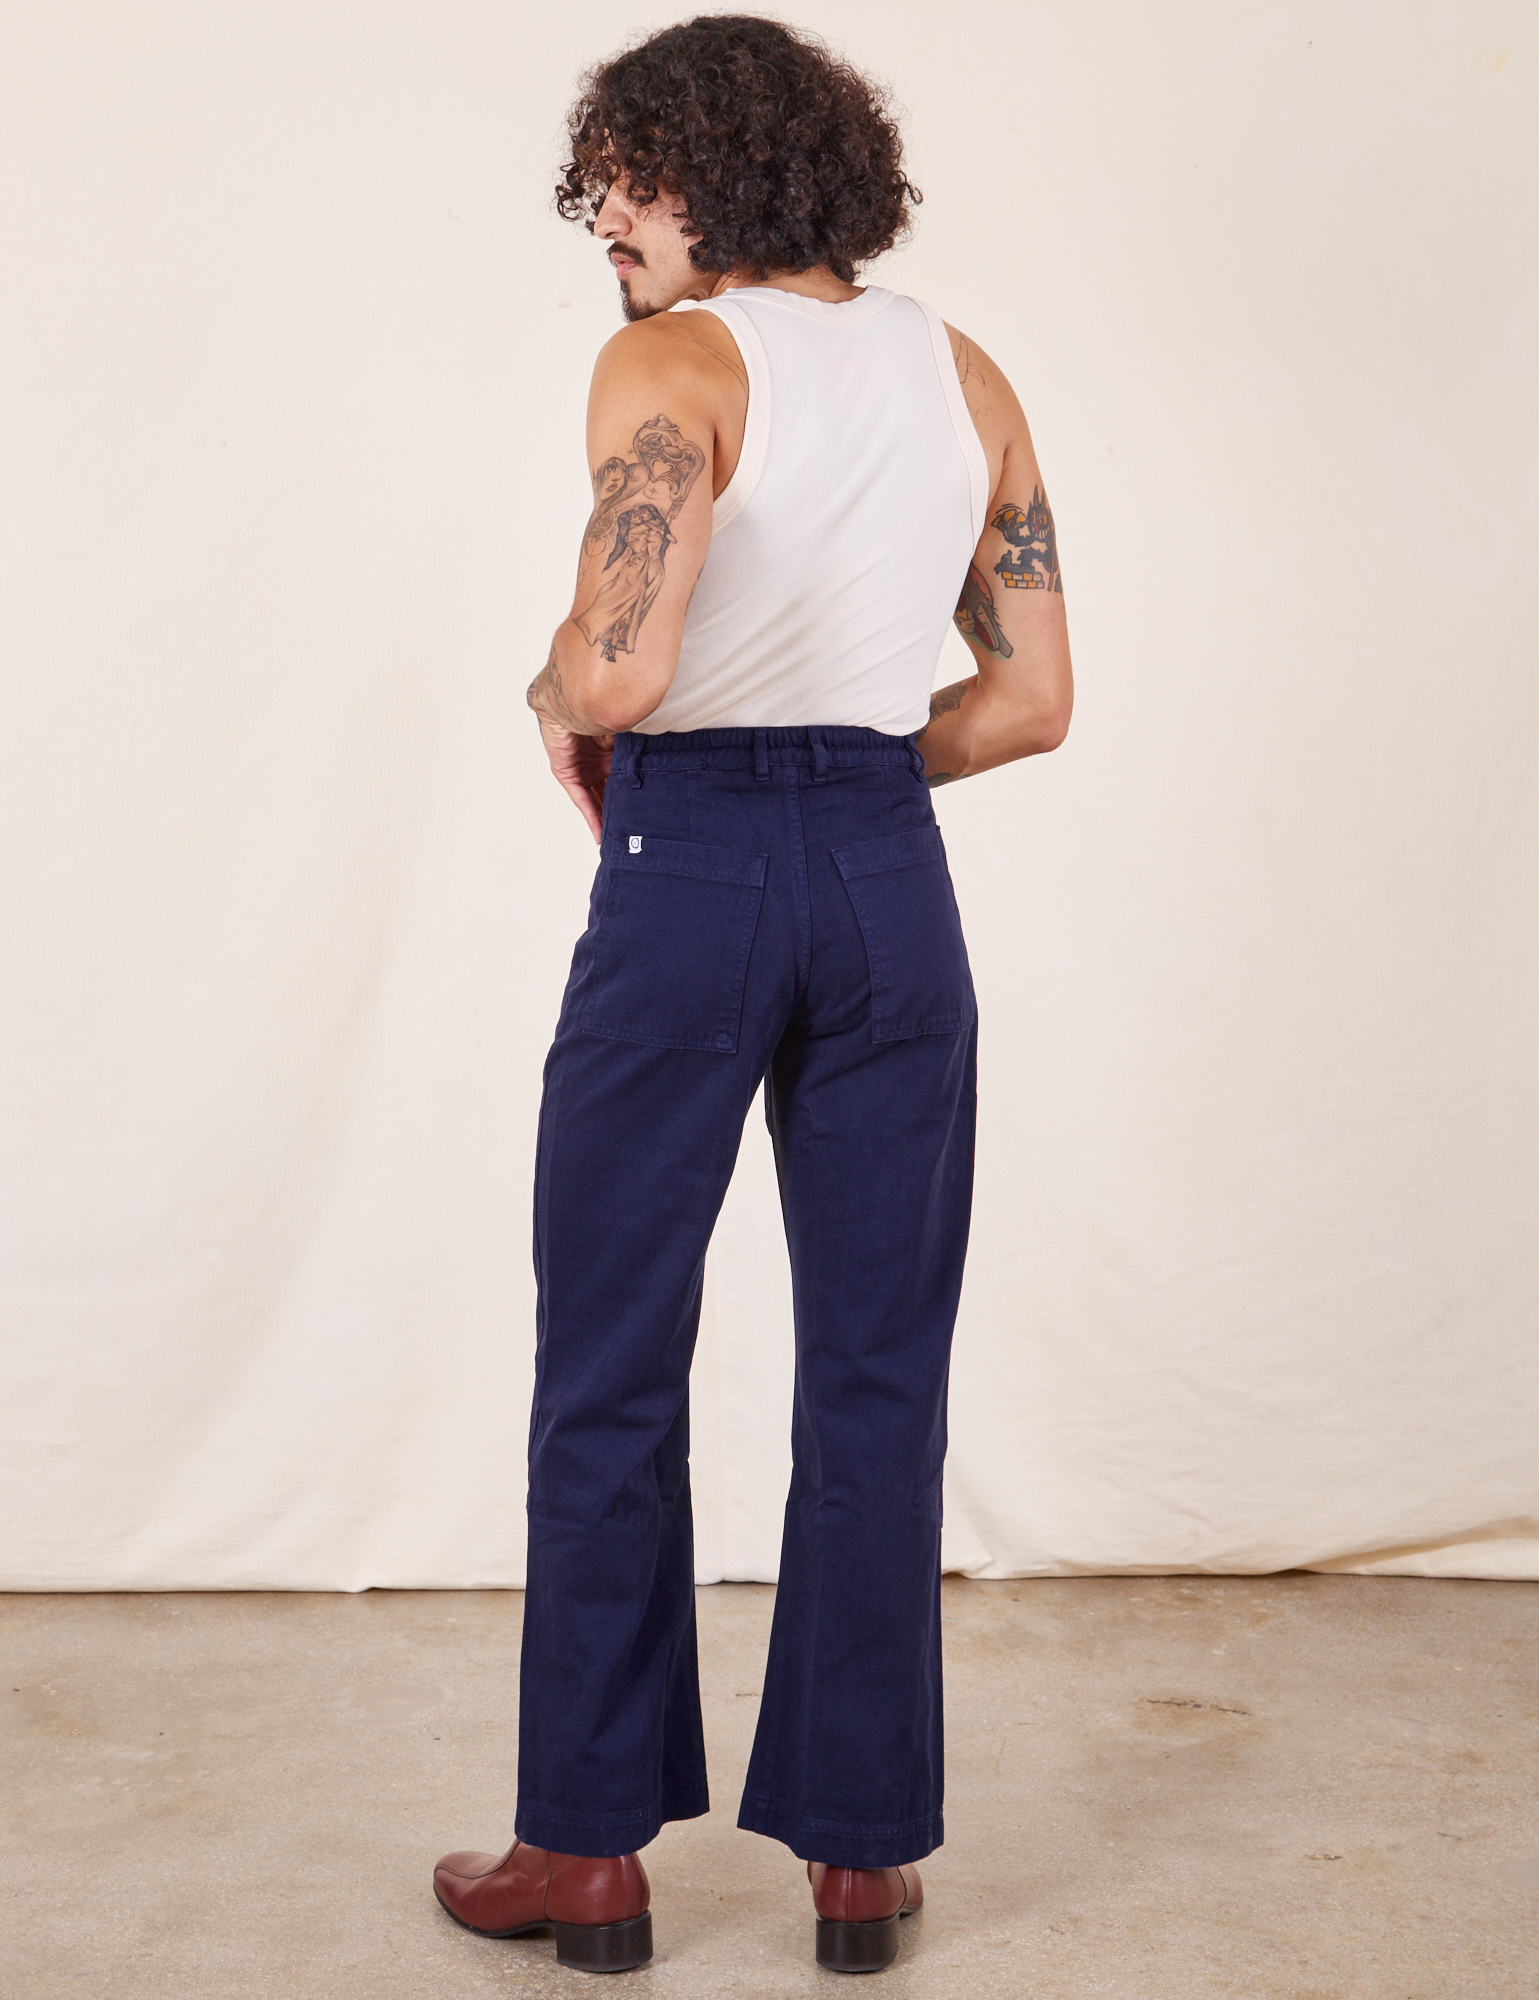 Back view of Western Pants in Navy Blue and vintage off-white Tank Top